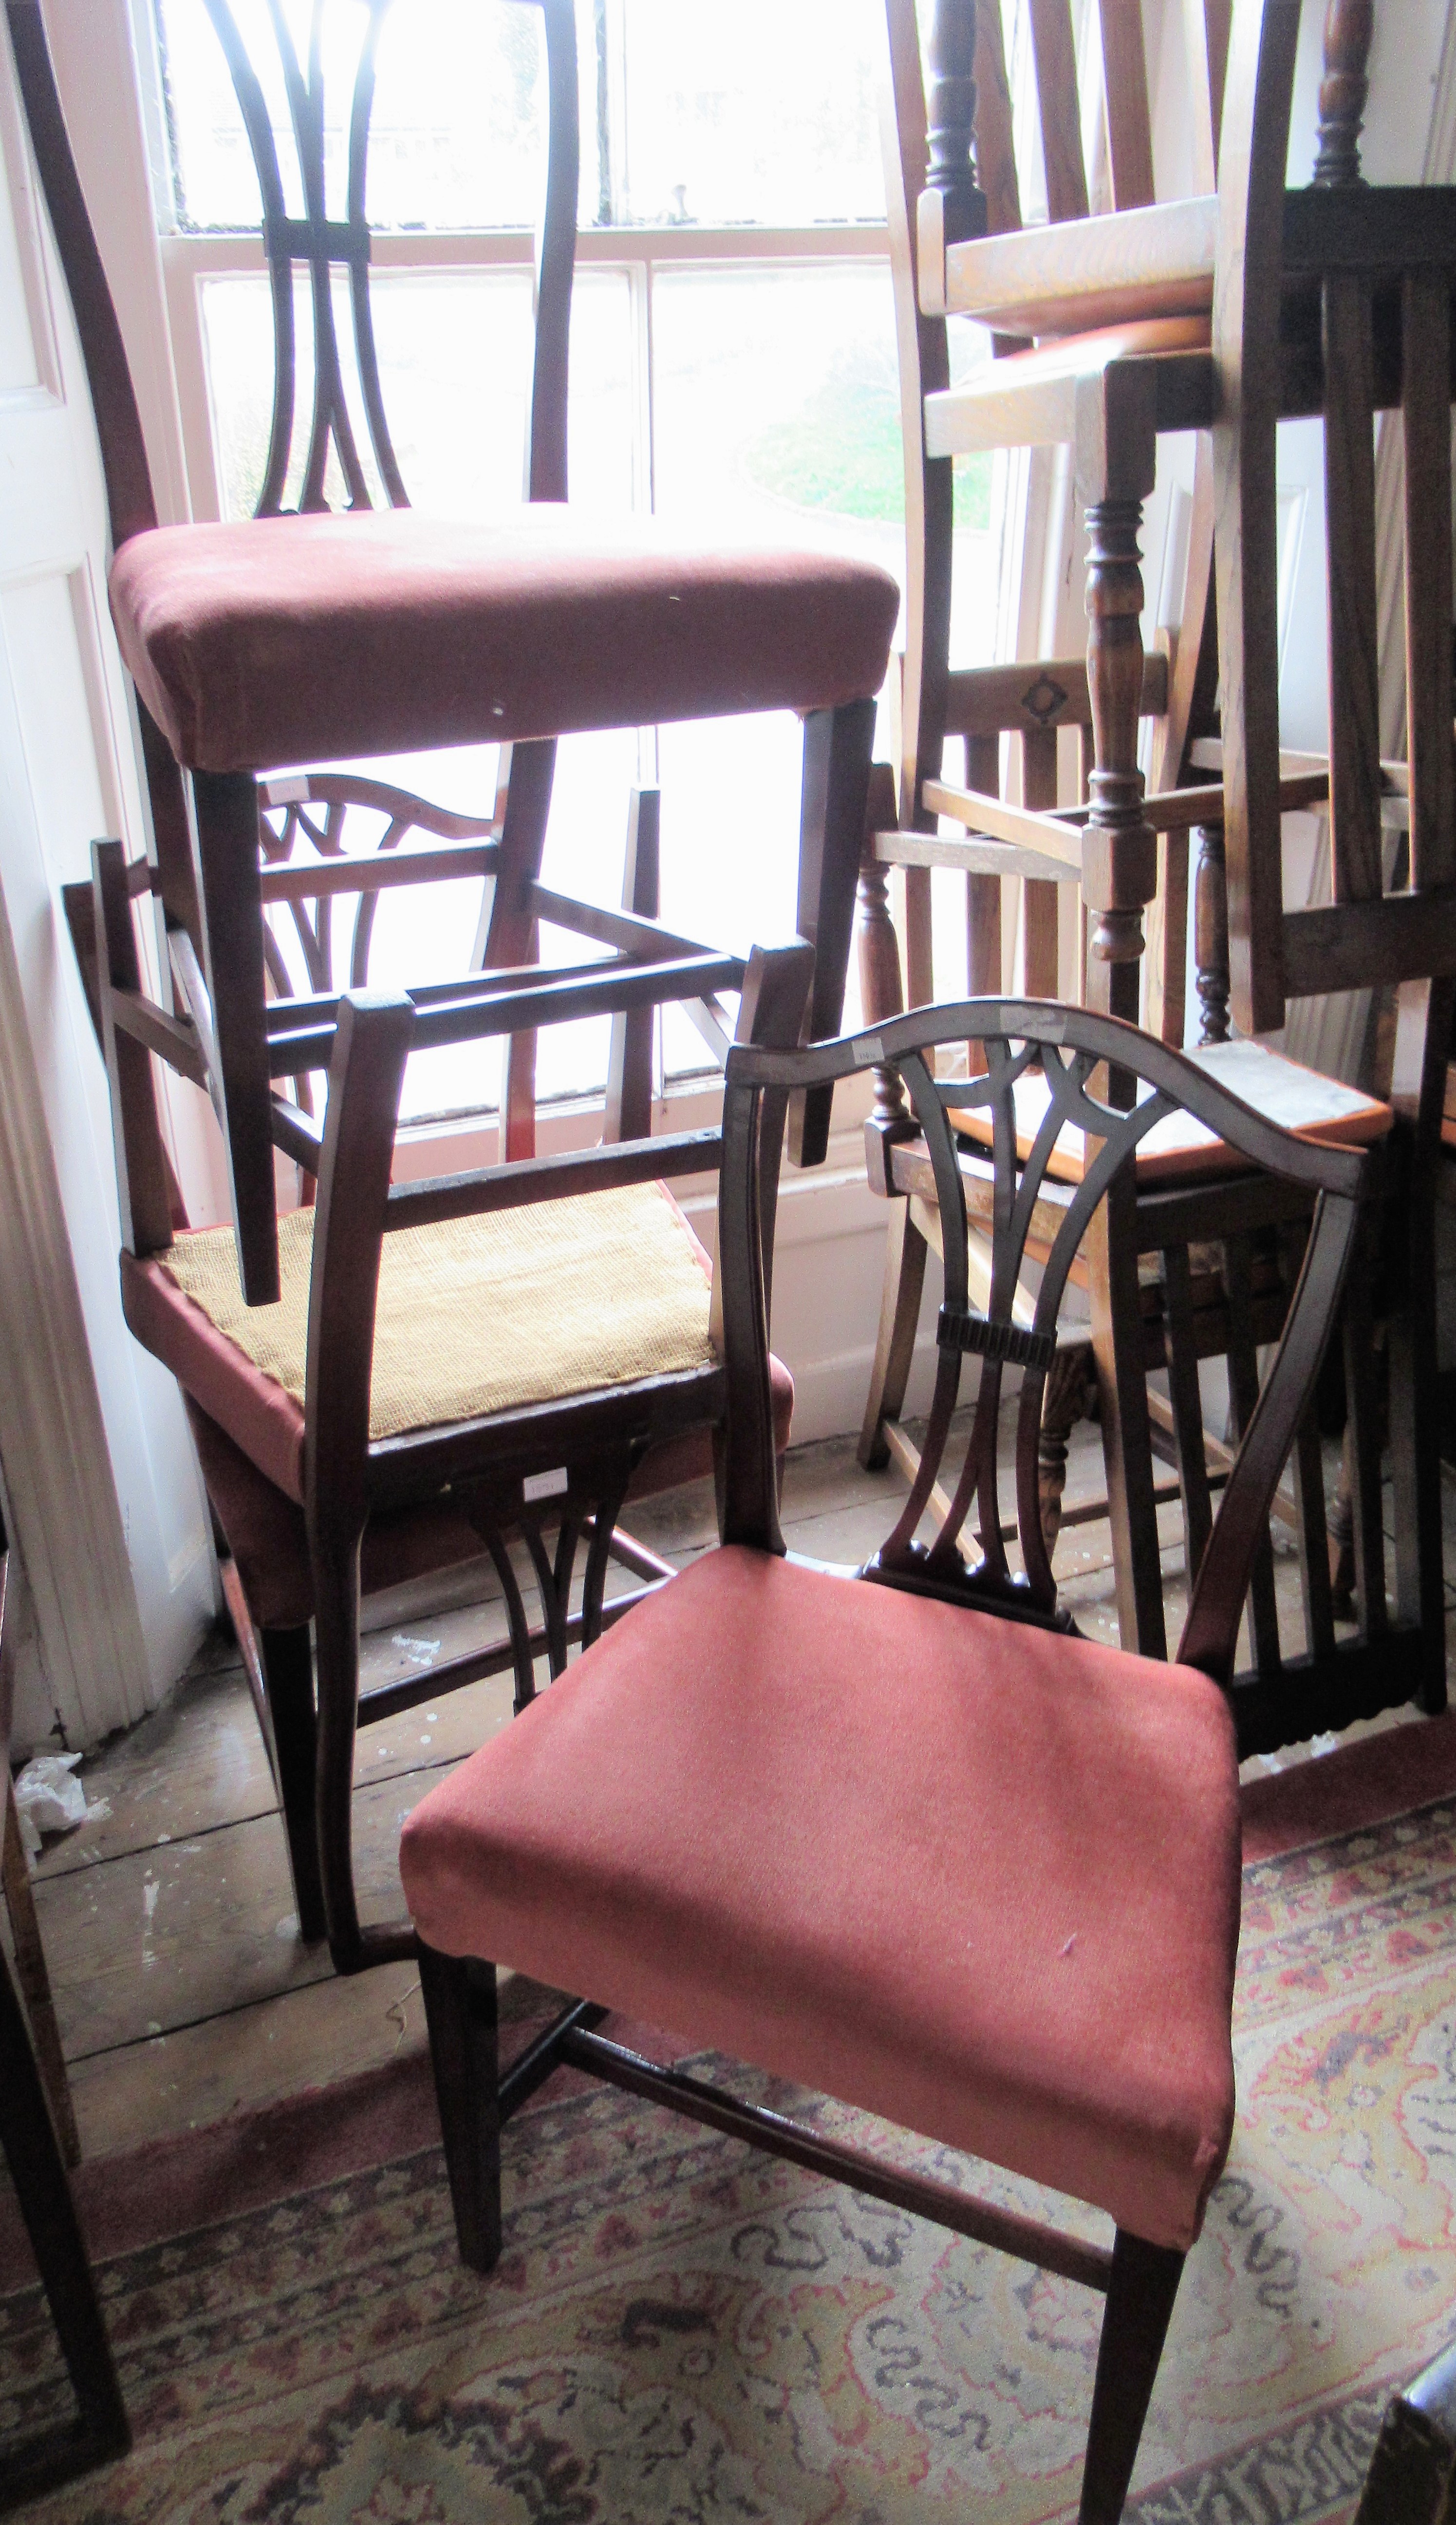 Set of four 19th Century mahogany shield back chairs (some damages), together with a ladderback